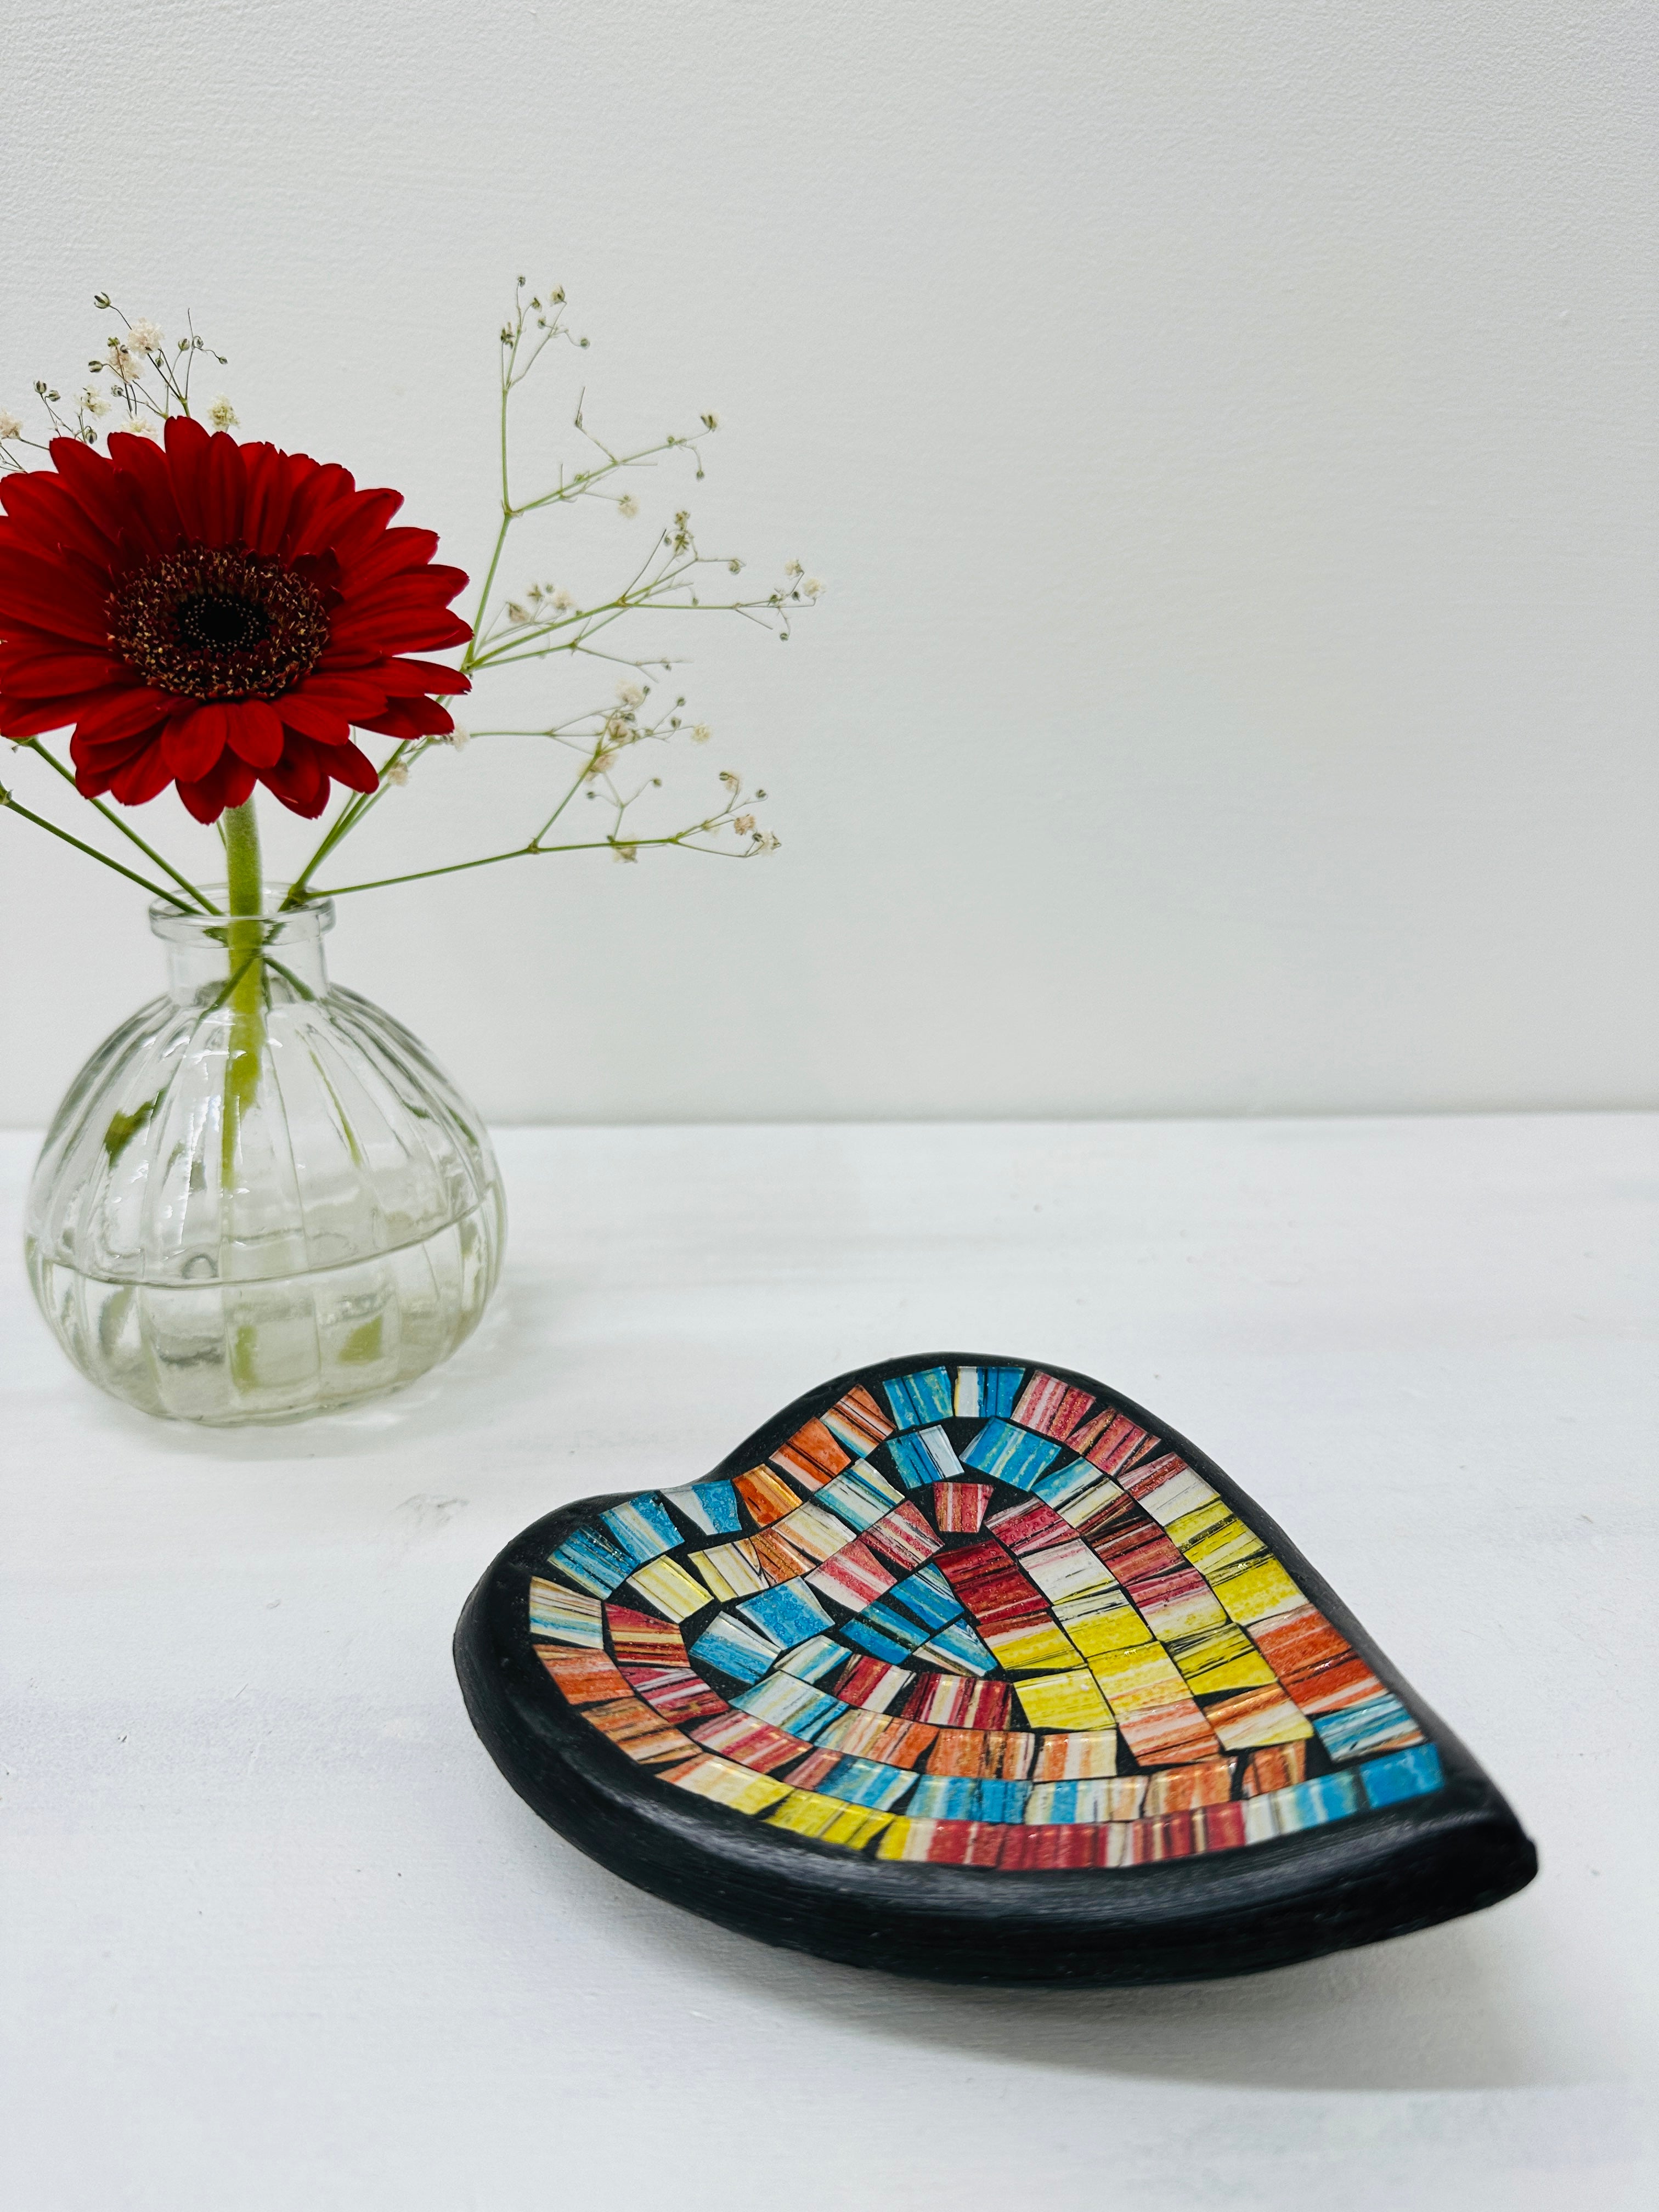 display view of mosaic heart bowl with a vase of flowers 